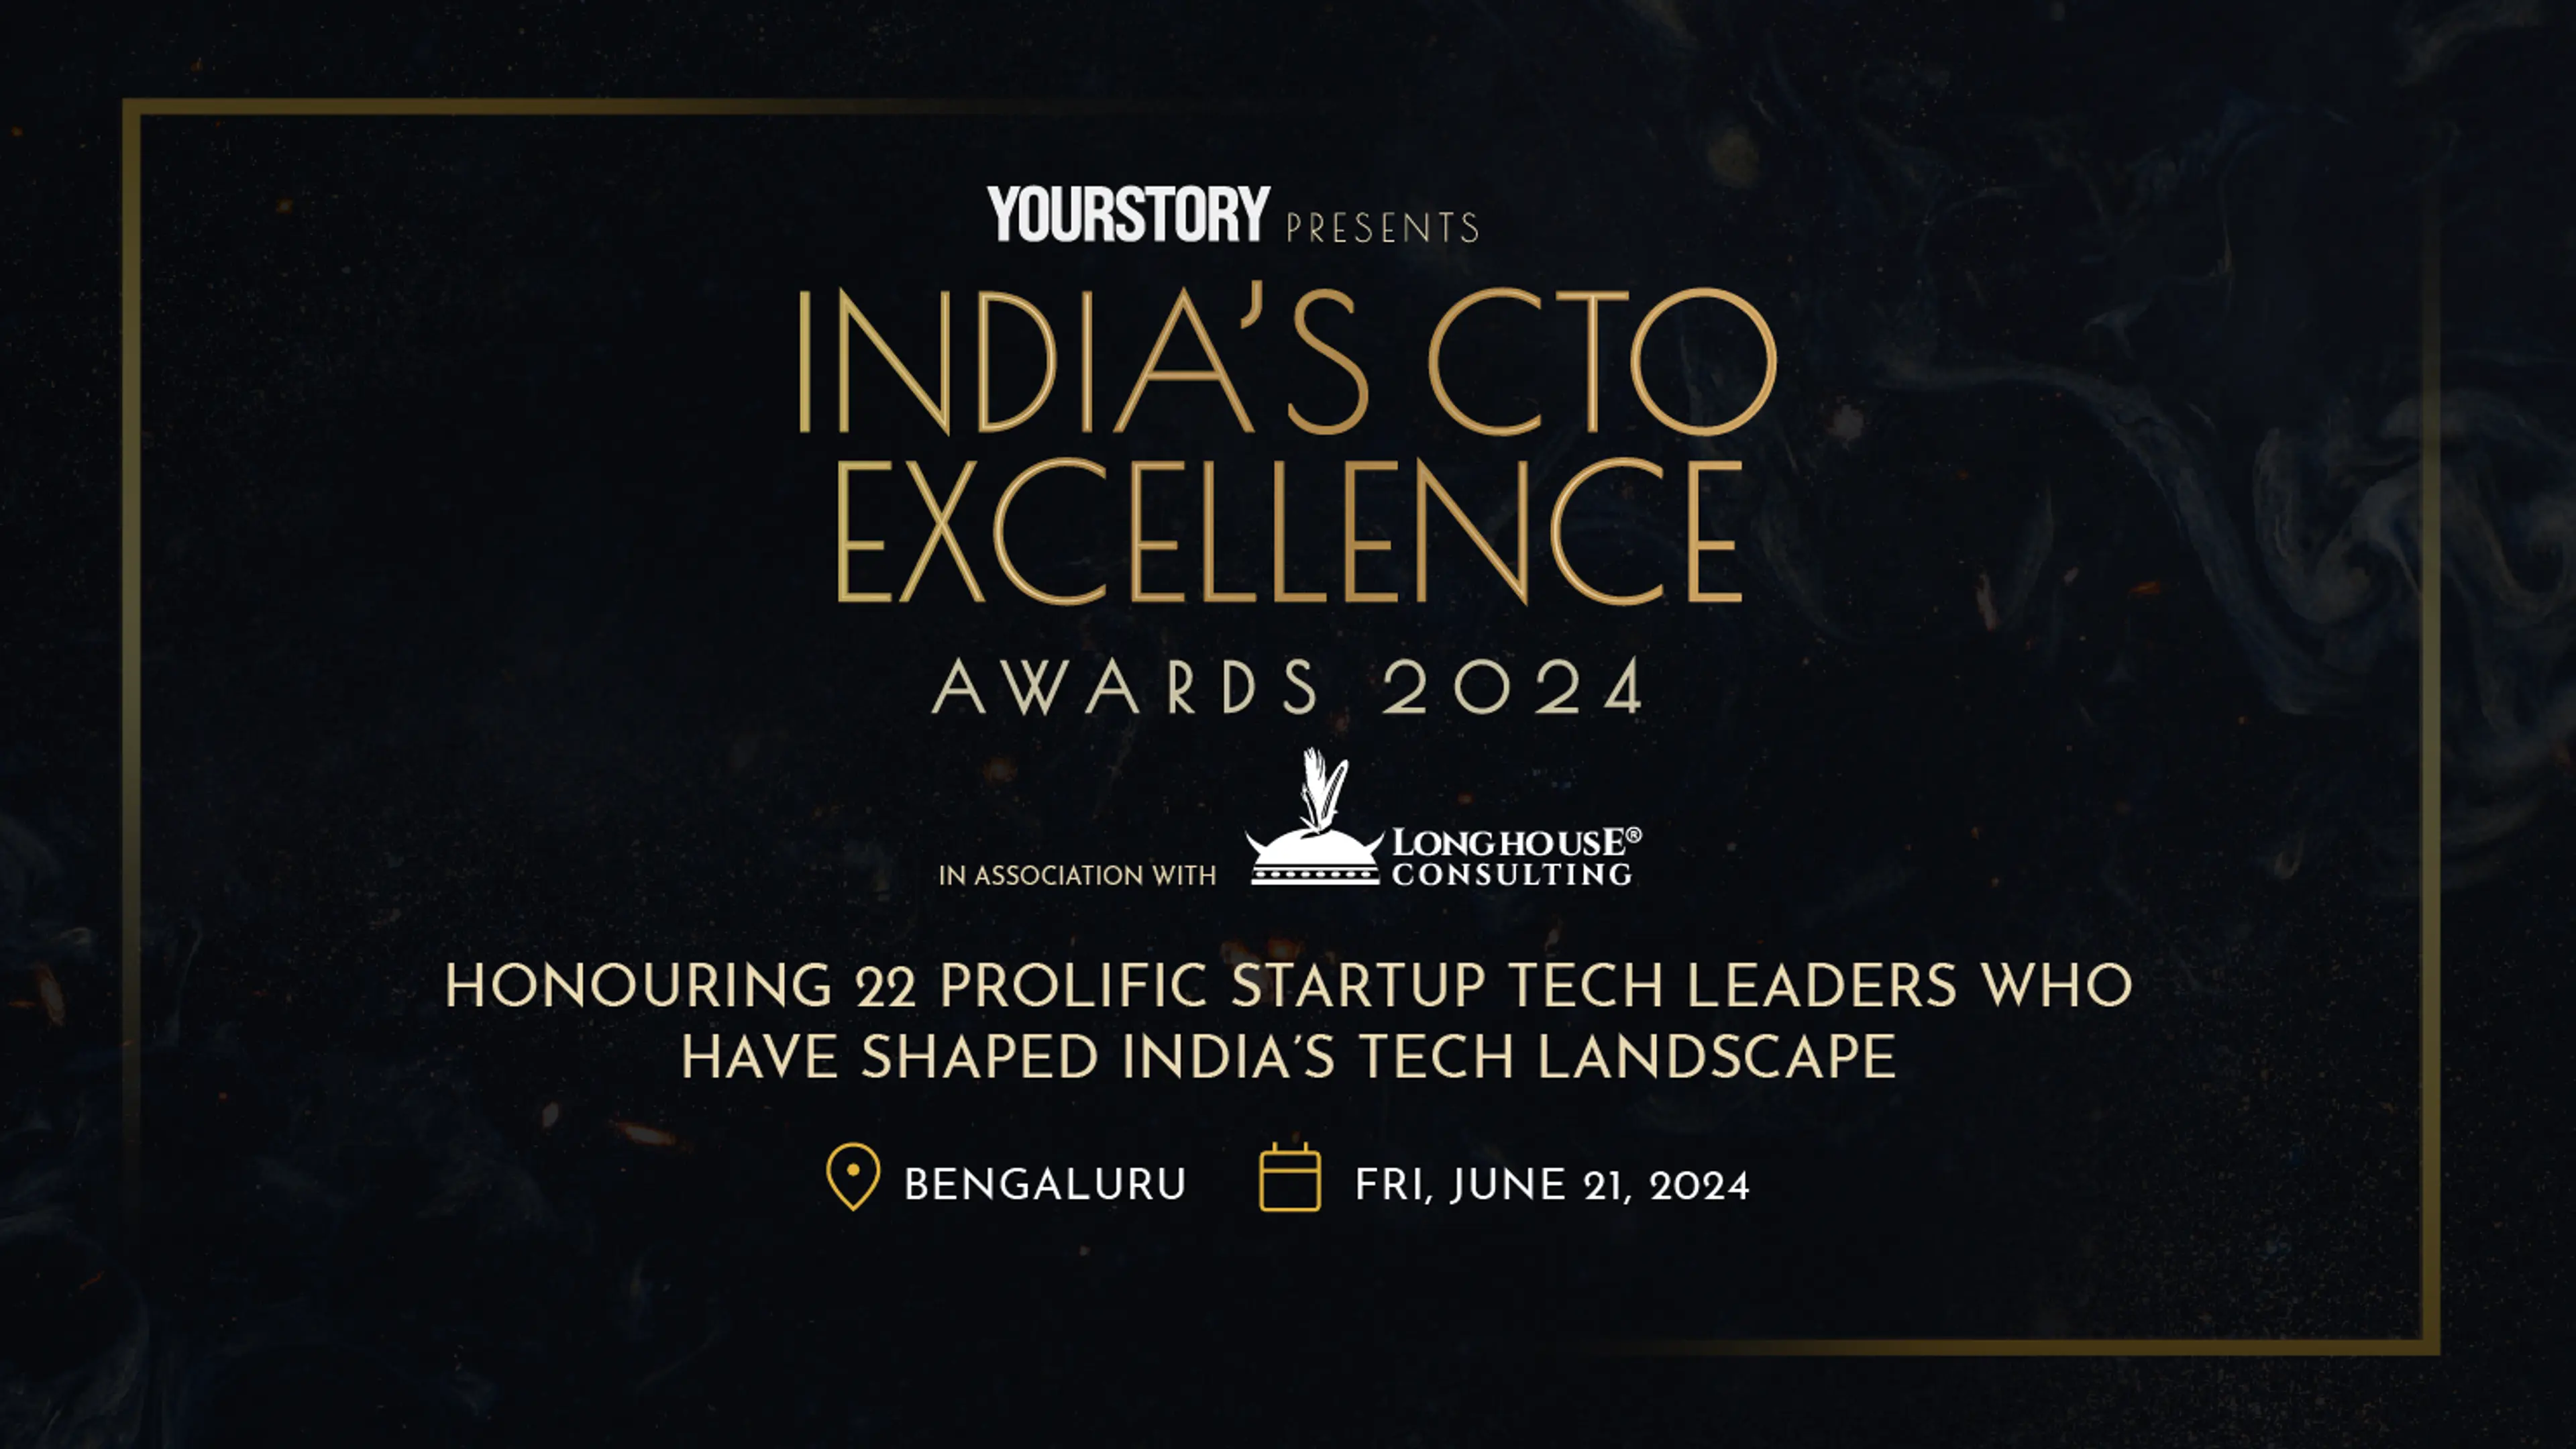 YourStory and Longhouse Consulting to launch India's CTO Excellence Awards